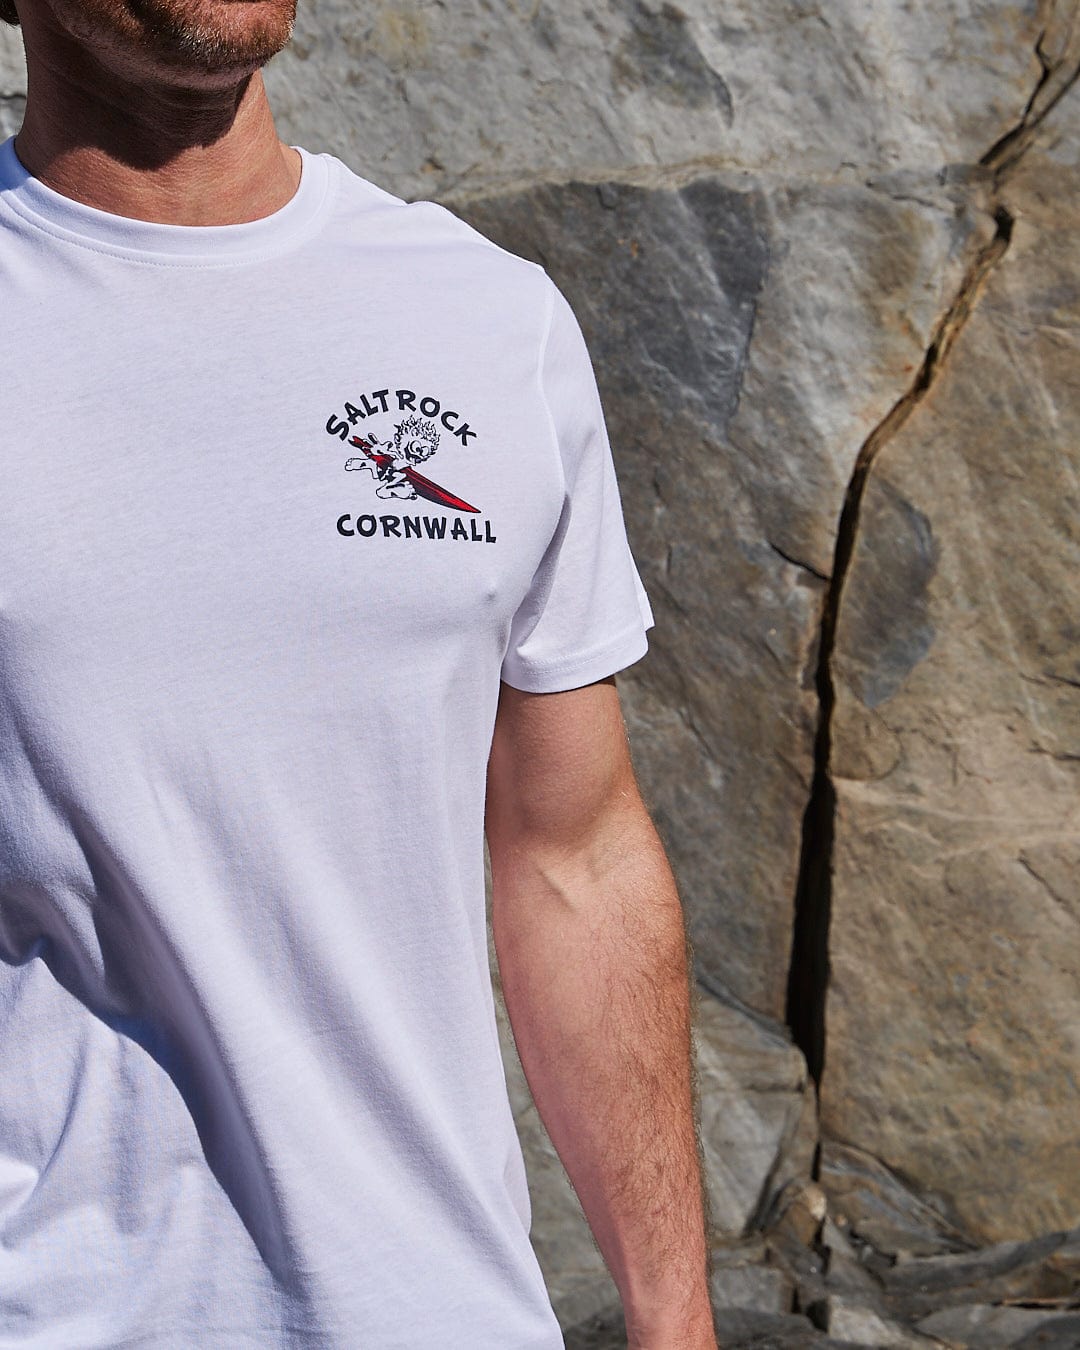 A man in a Wave Rider Cornwall - Mens Short Sleeve T-Shirt in White featuring Saltrock branding stands against a rocky backdrop.